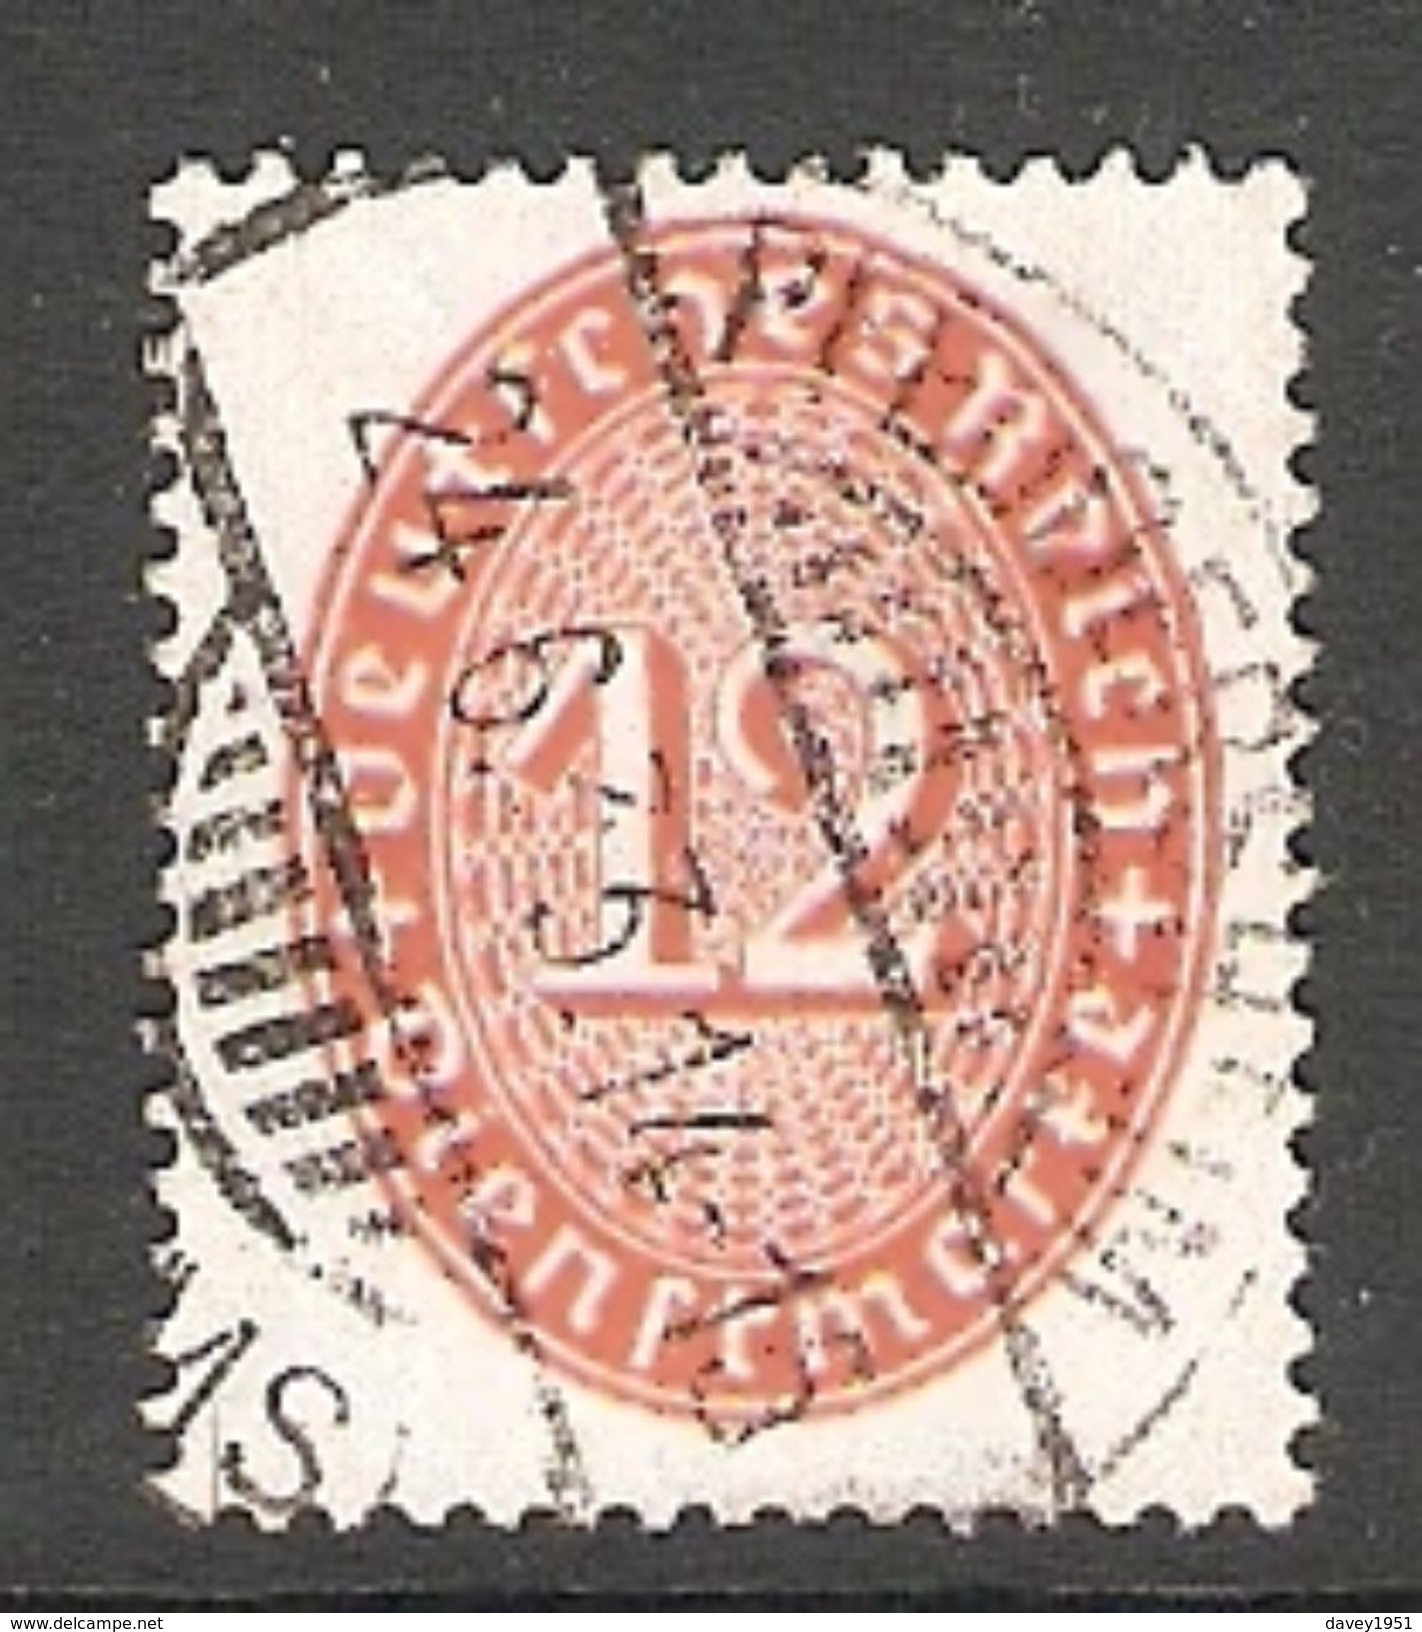 004918 Germany 1932 Official 12pf FU - Service